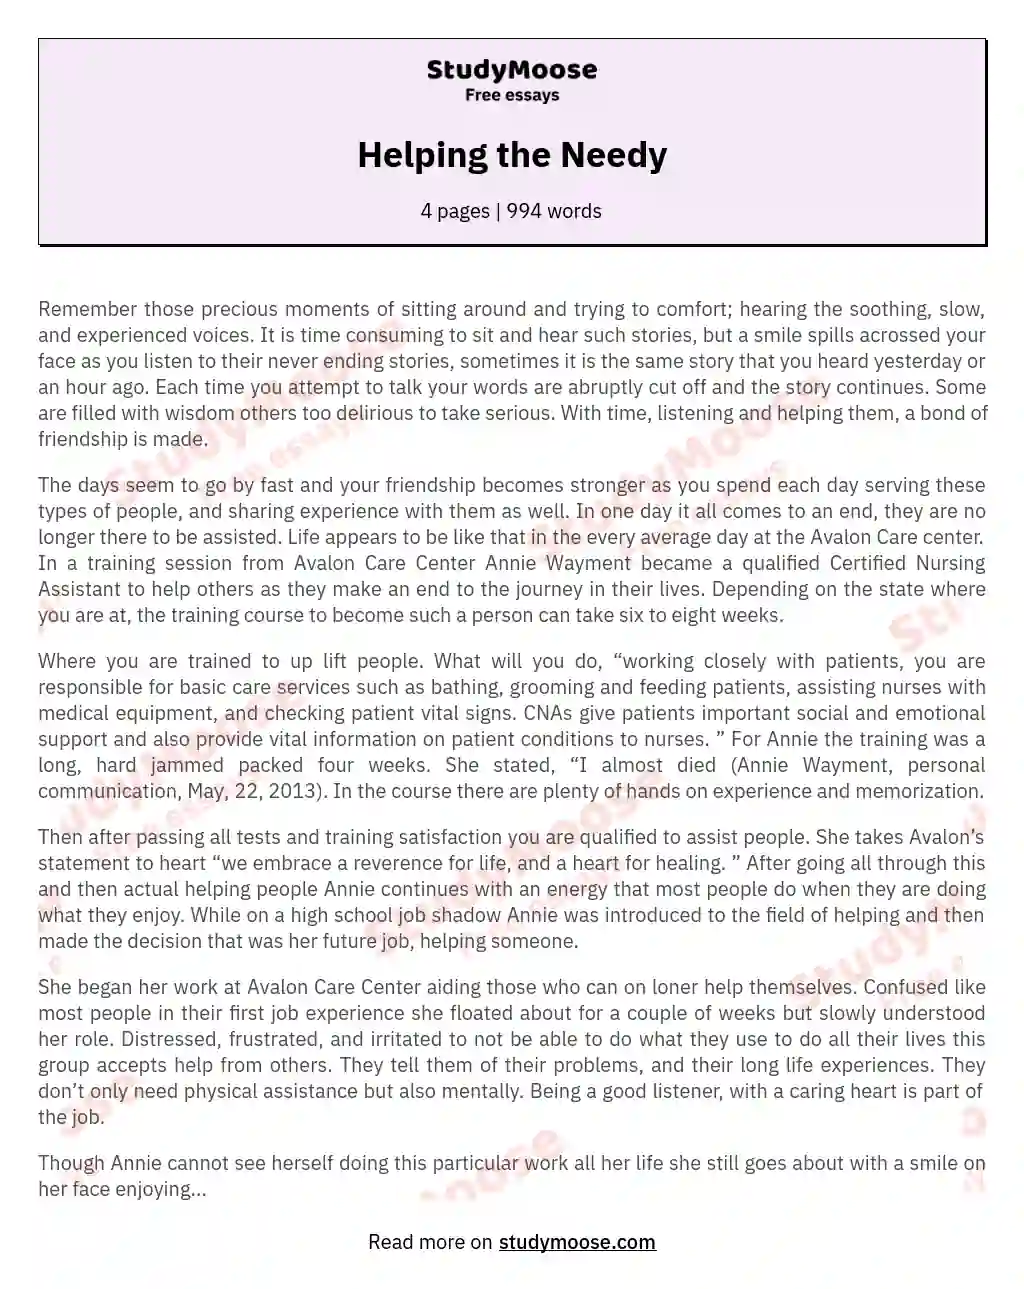 importance of helping the poor and needy essay